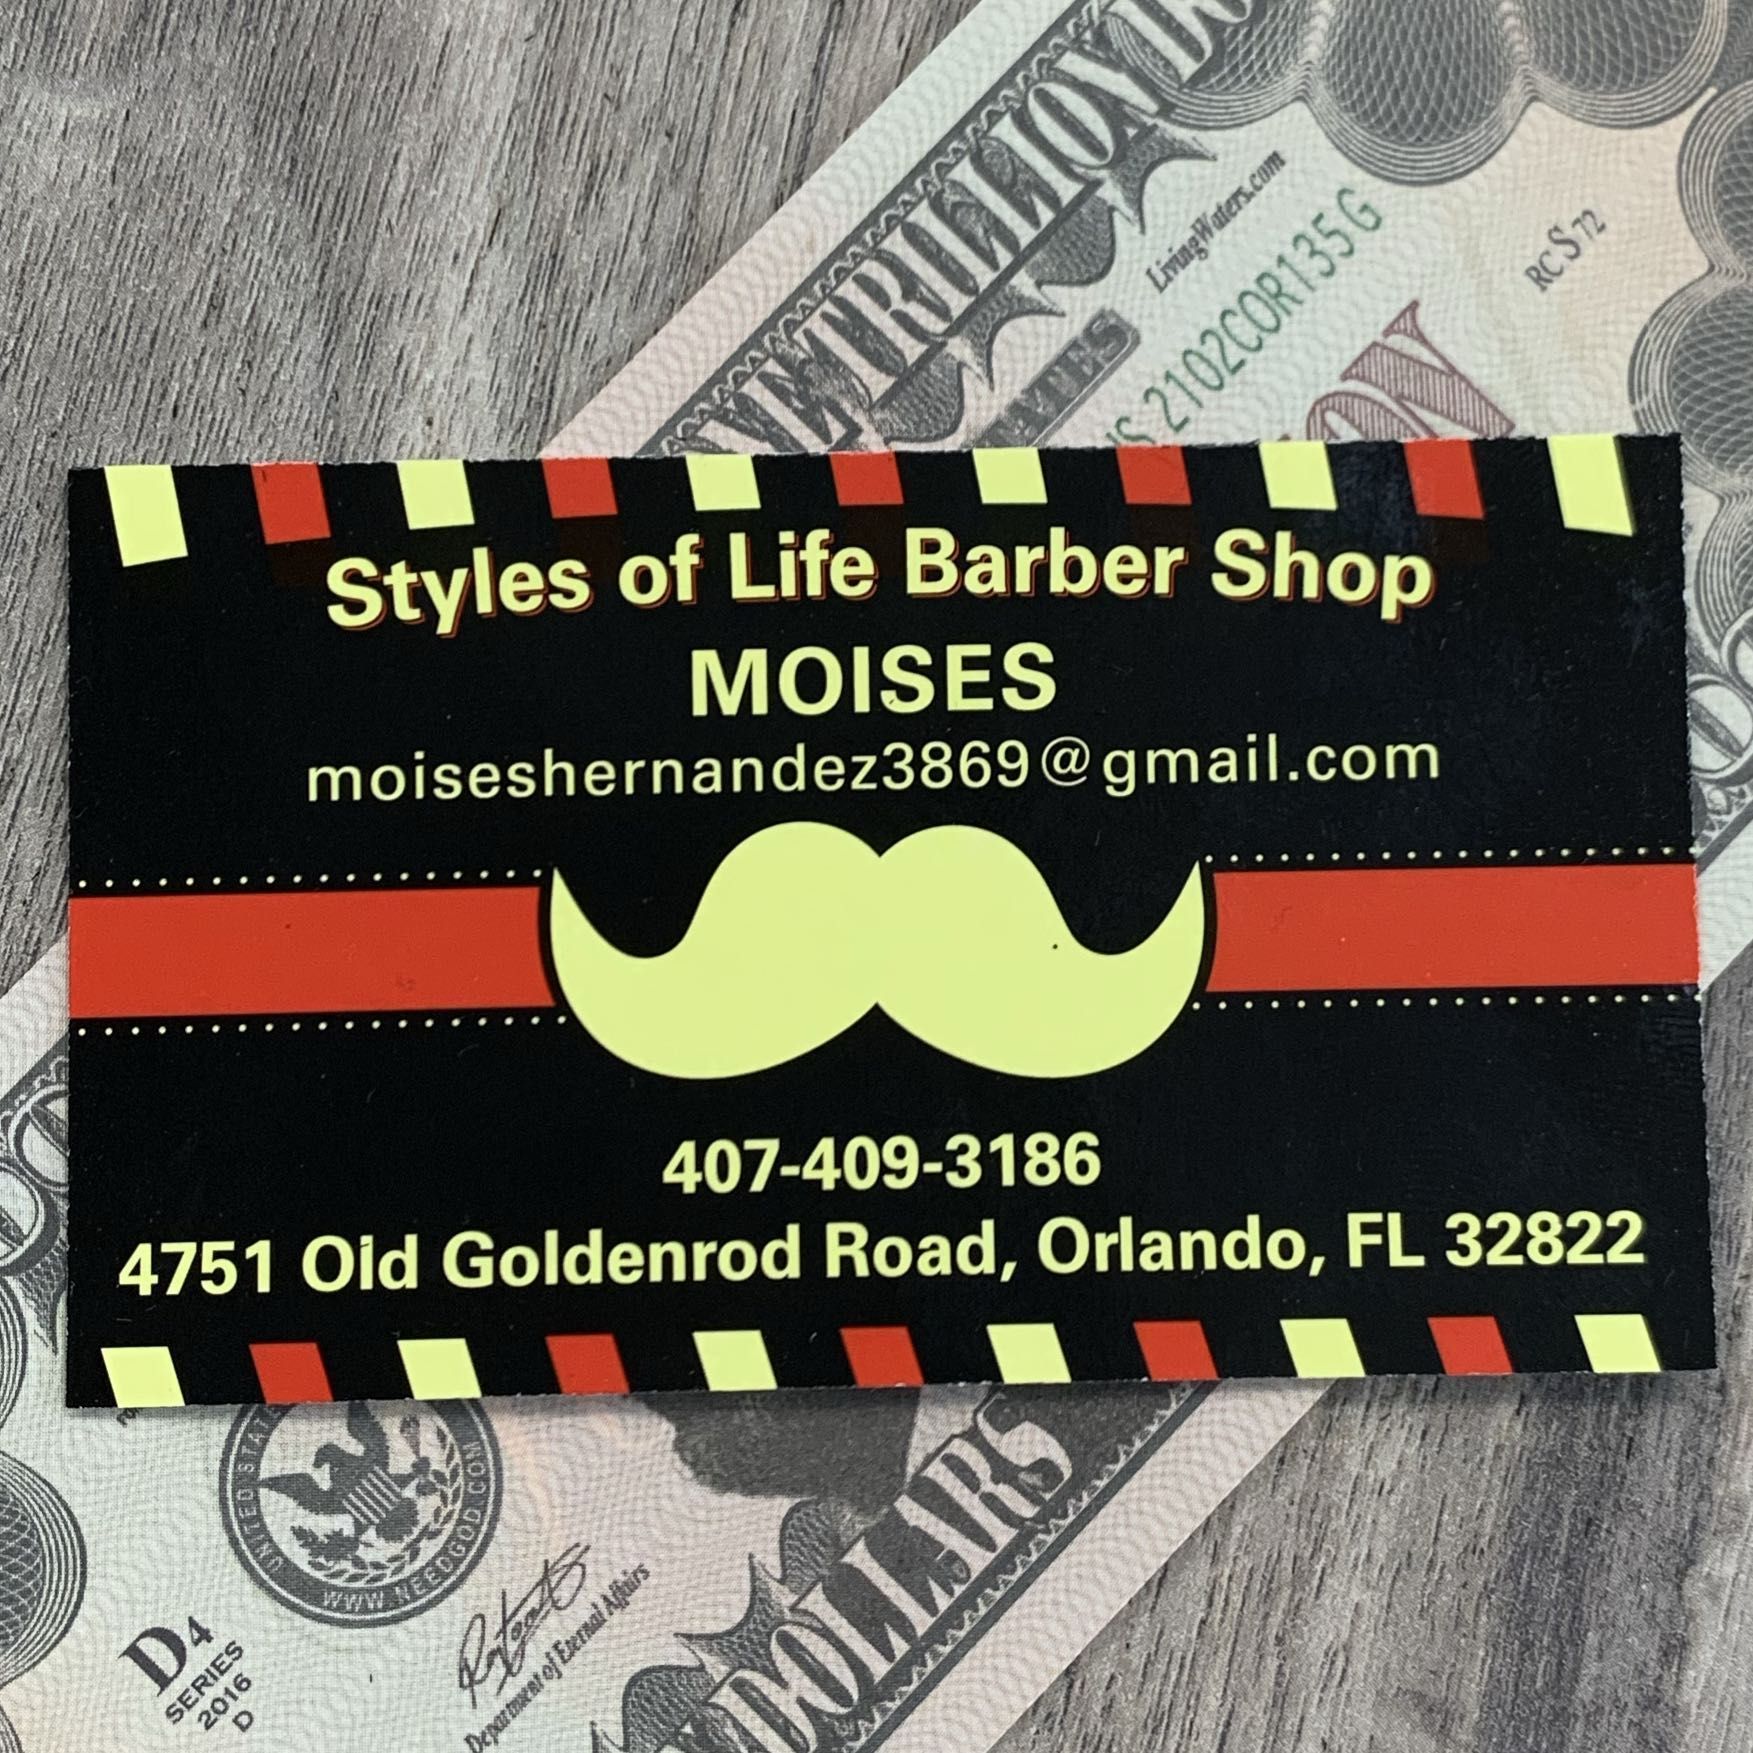 Style of Life, 4751 Old Goldenrod Rd, #3, Orlando, 32822